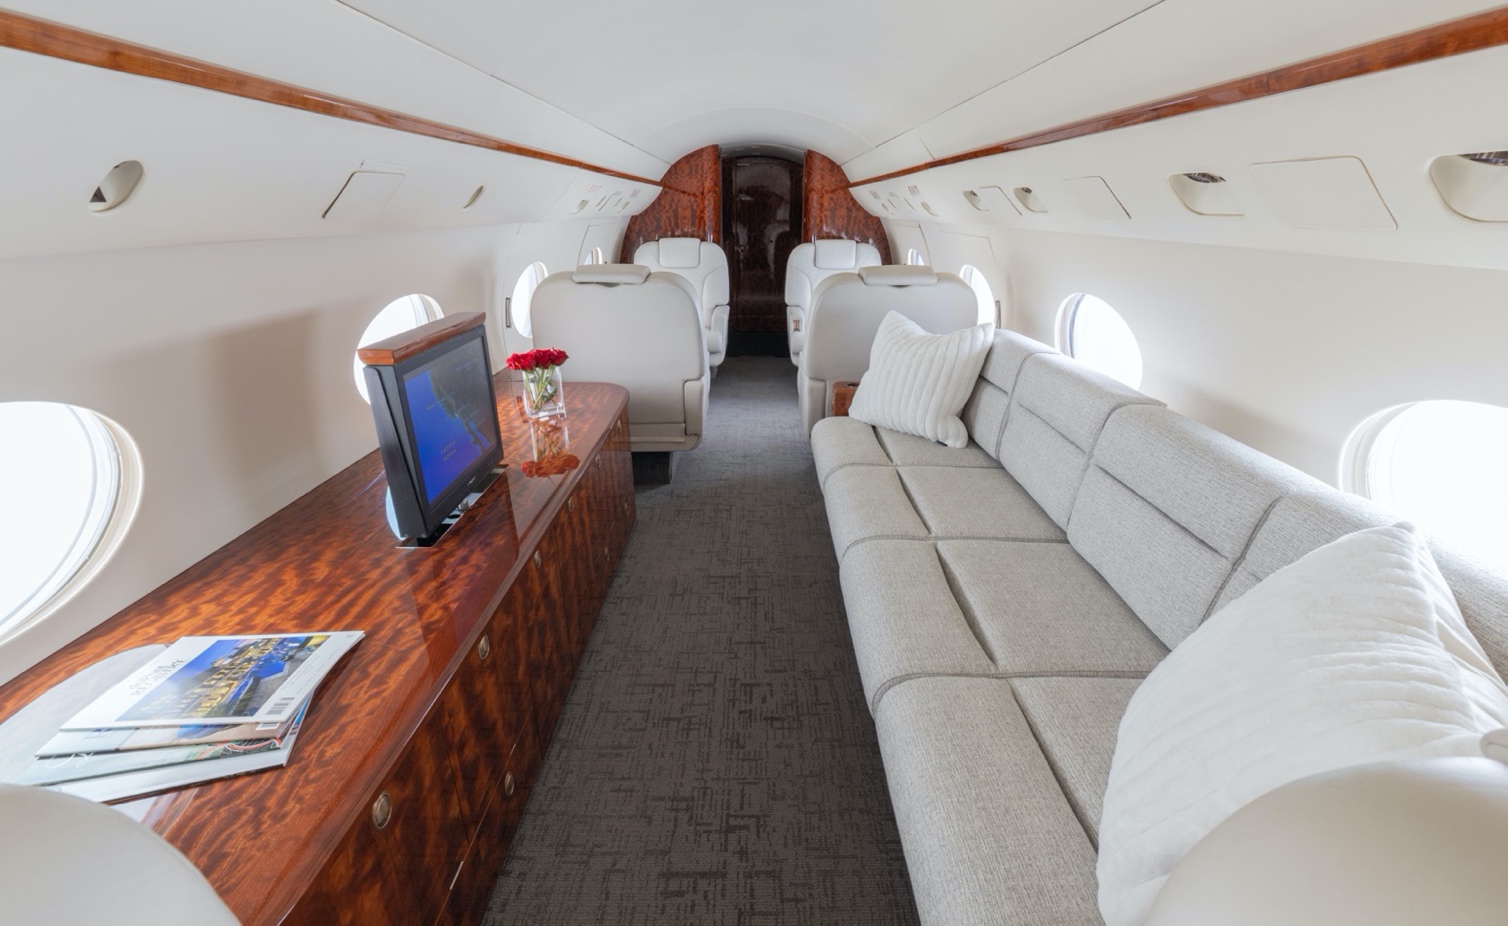 Gulfstream GIV gallery image /userfiles/images/GIV_sn1061/mid%20aft.jpg